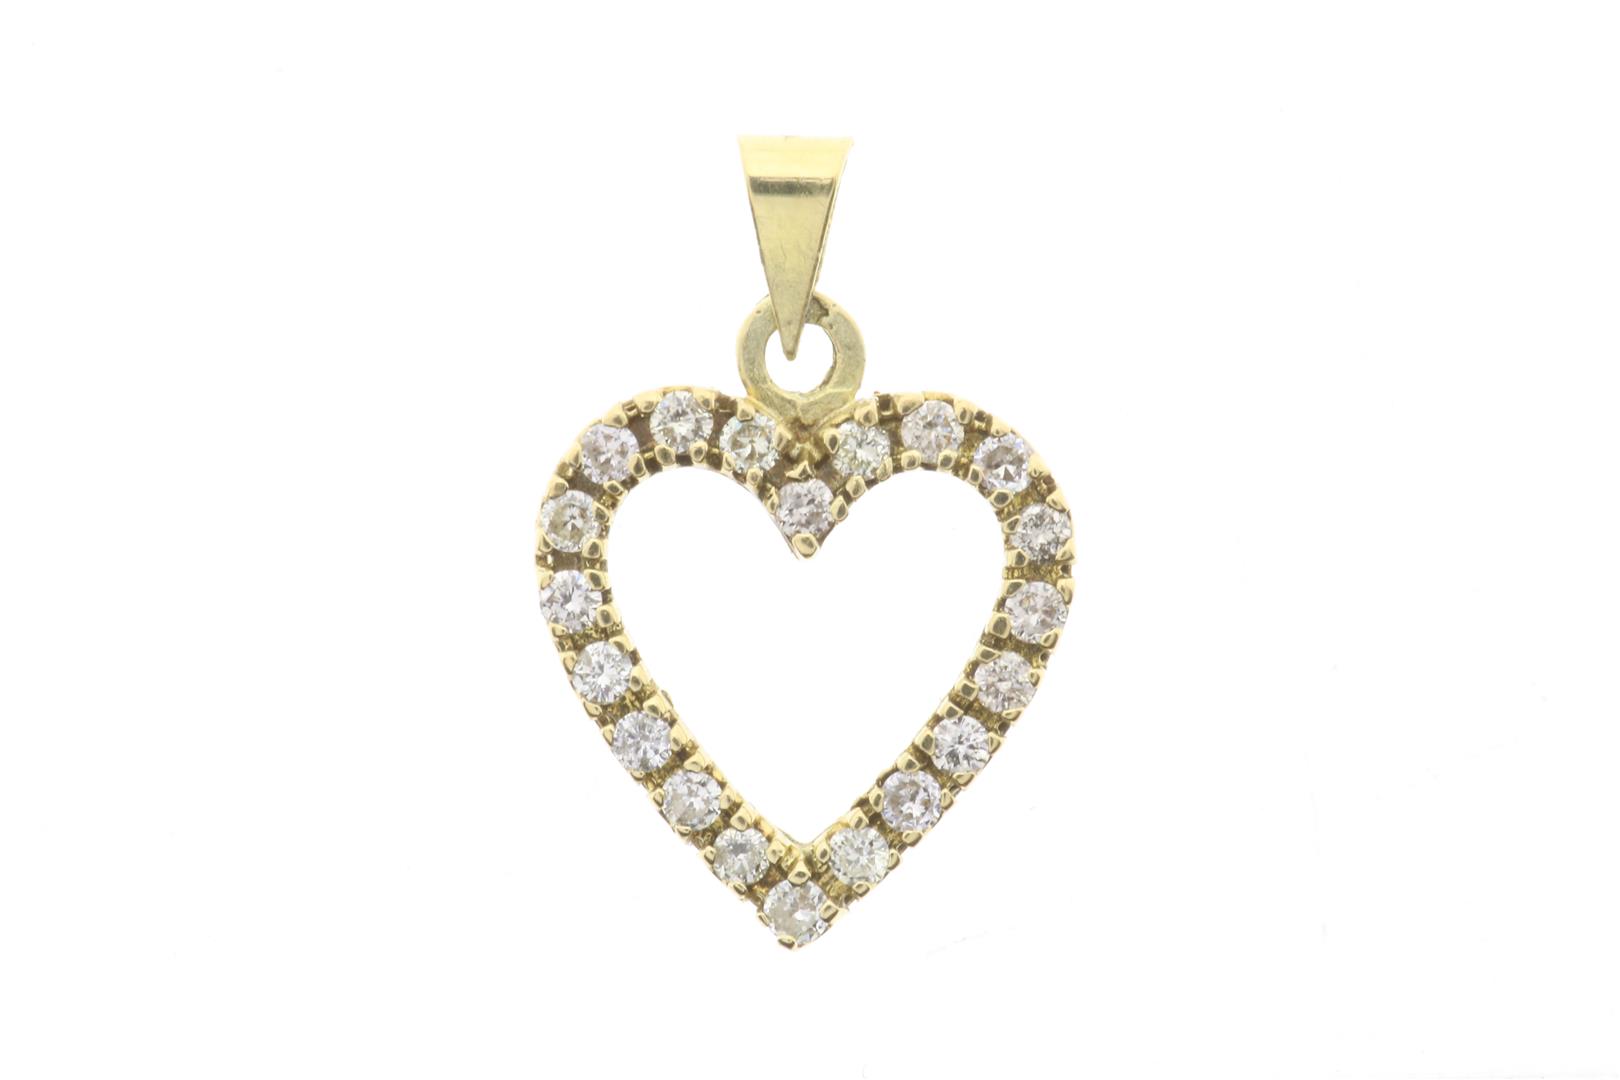 Yellow gold pendant set with diamonds in heart-shaped pavé setting, gross weight 2 grams, length 2.5